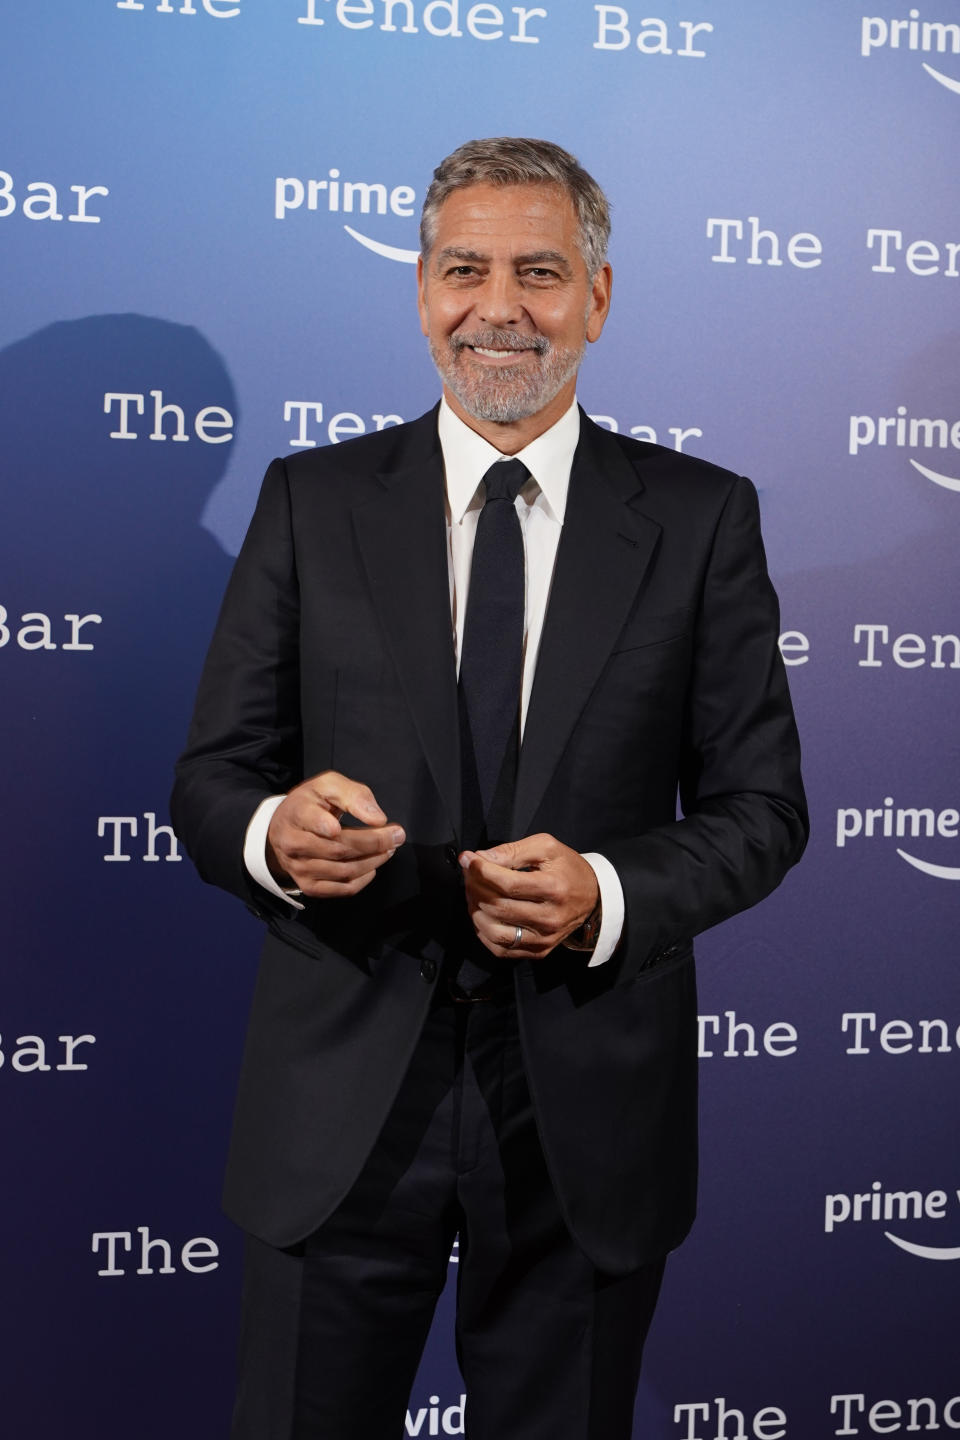 George Clooney at the Nomad Hotel, London during a photo call for the Tender Bar, during the BFI London Film Festival. Picture date: Sunday October 10, 2021.